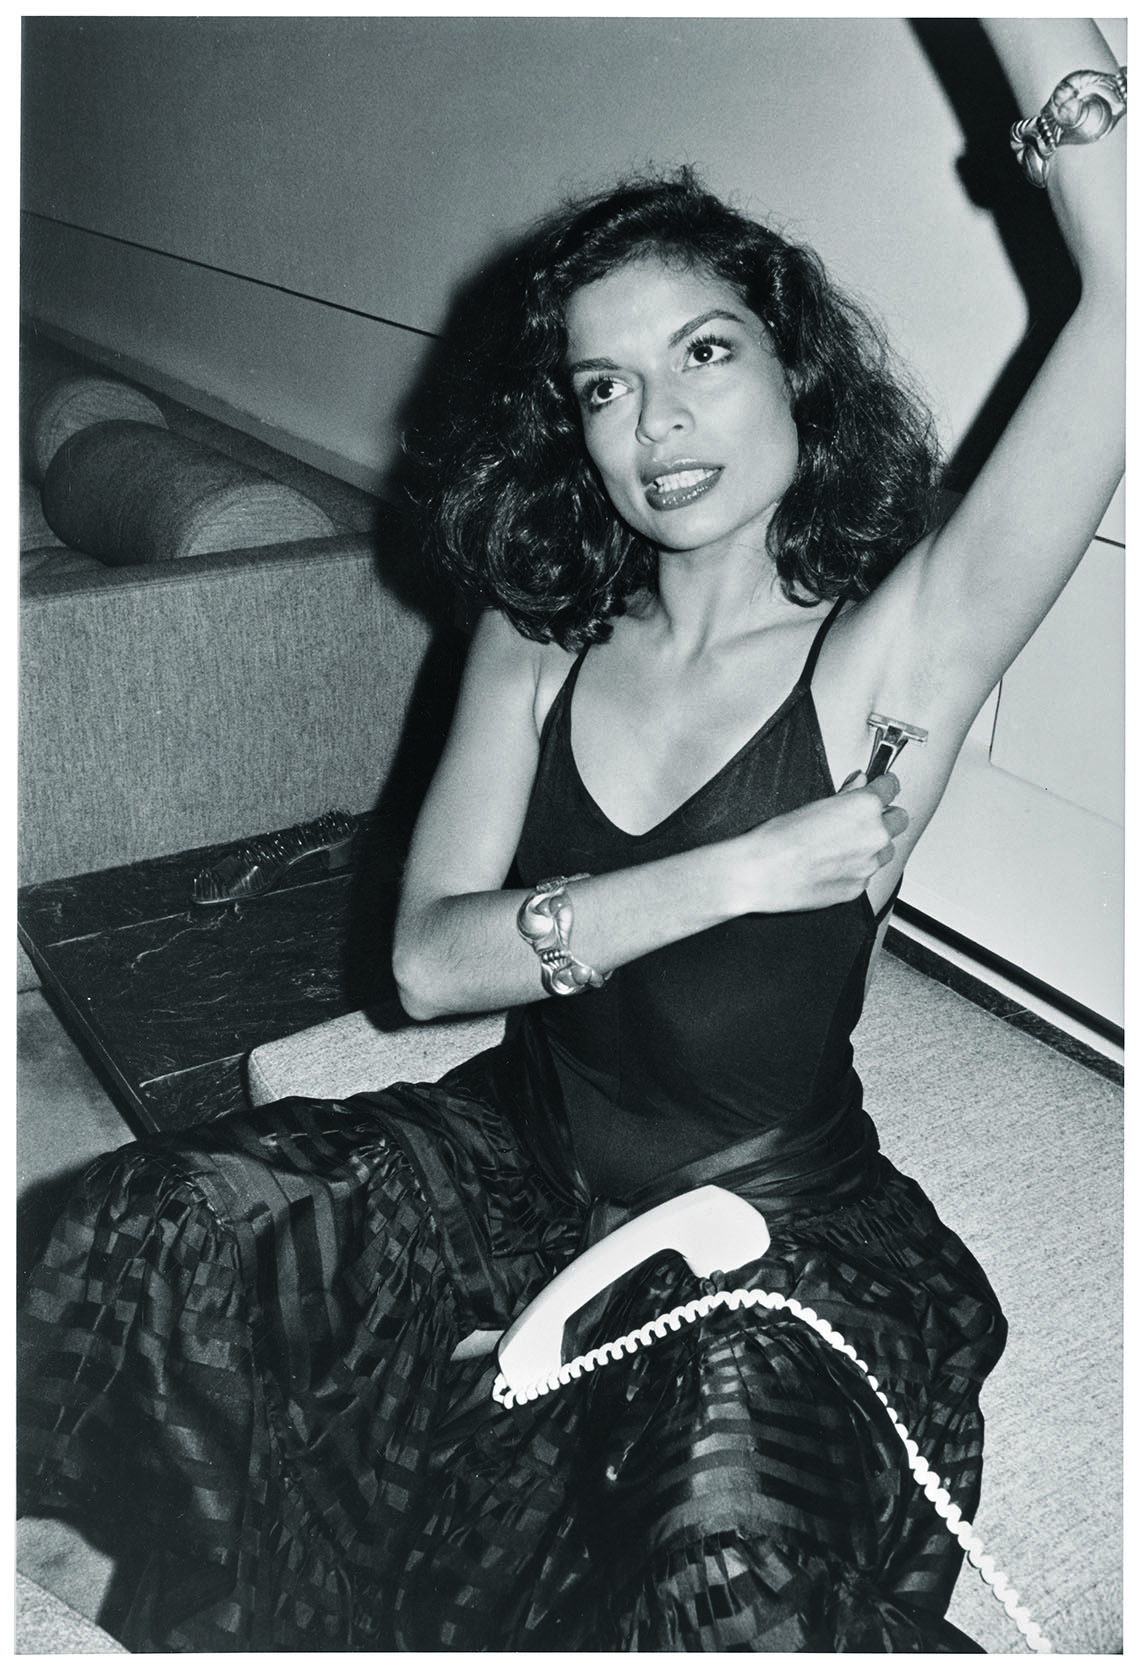 Andy Warhol (U.S.A., 1928–1987), Negative [Bianca Jagger shaving in the living room], c. 1979, Black-and-white negatives. Cantor Arts Center collection, Gift of The Andy Warhol Foundation for the Visual Arts, 2014.41.3771. © The Andy Warhol Foundation for the Visual Arts, Inc.